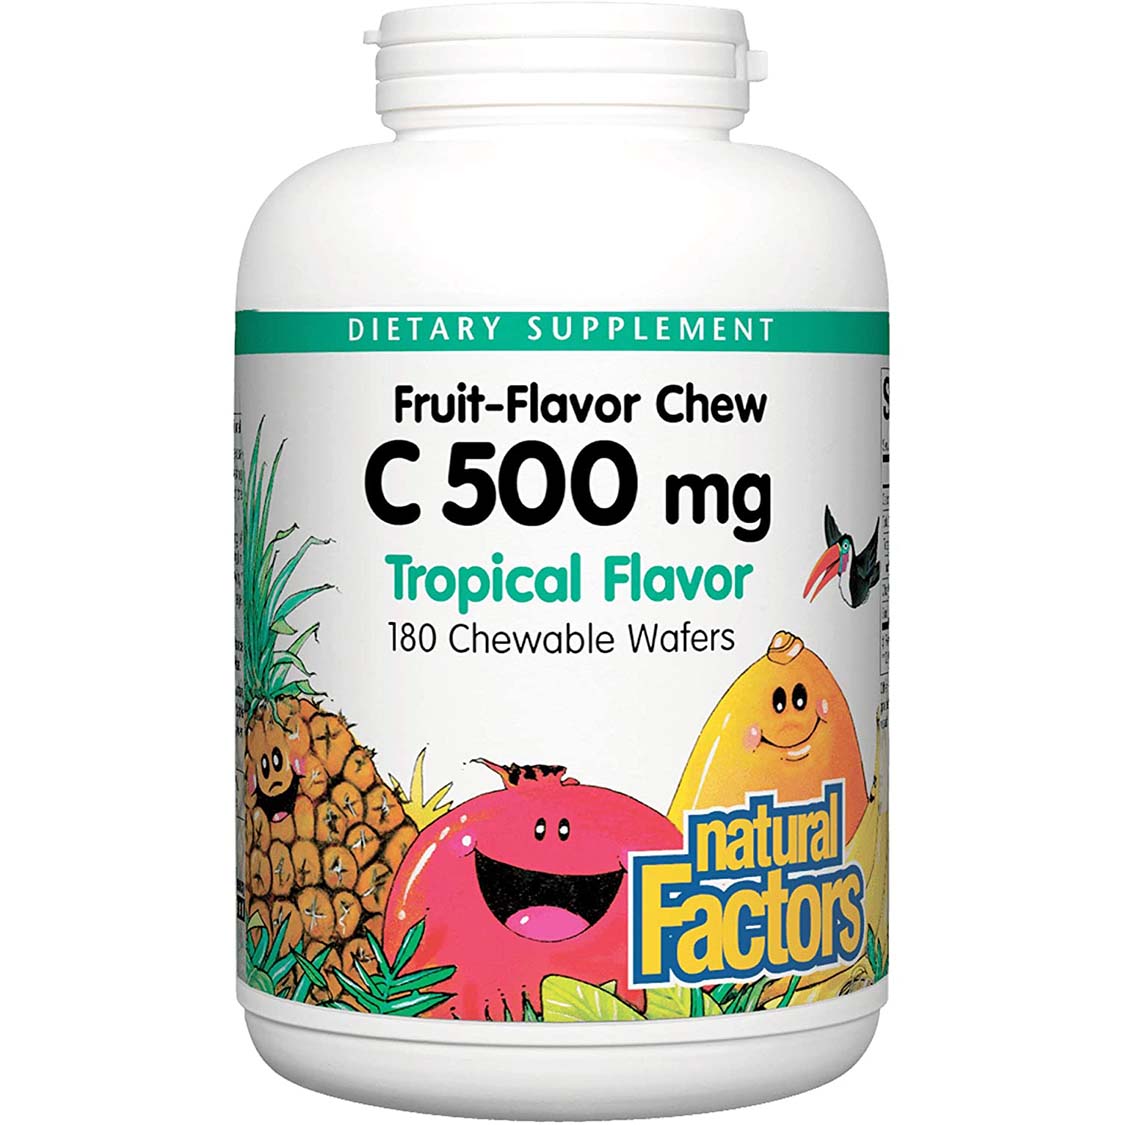 Natural Factors Vitamin C 500 mg Chewable Wafer, Tropical Flavor, 180 Chewable Wafer